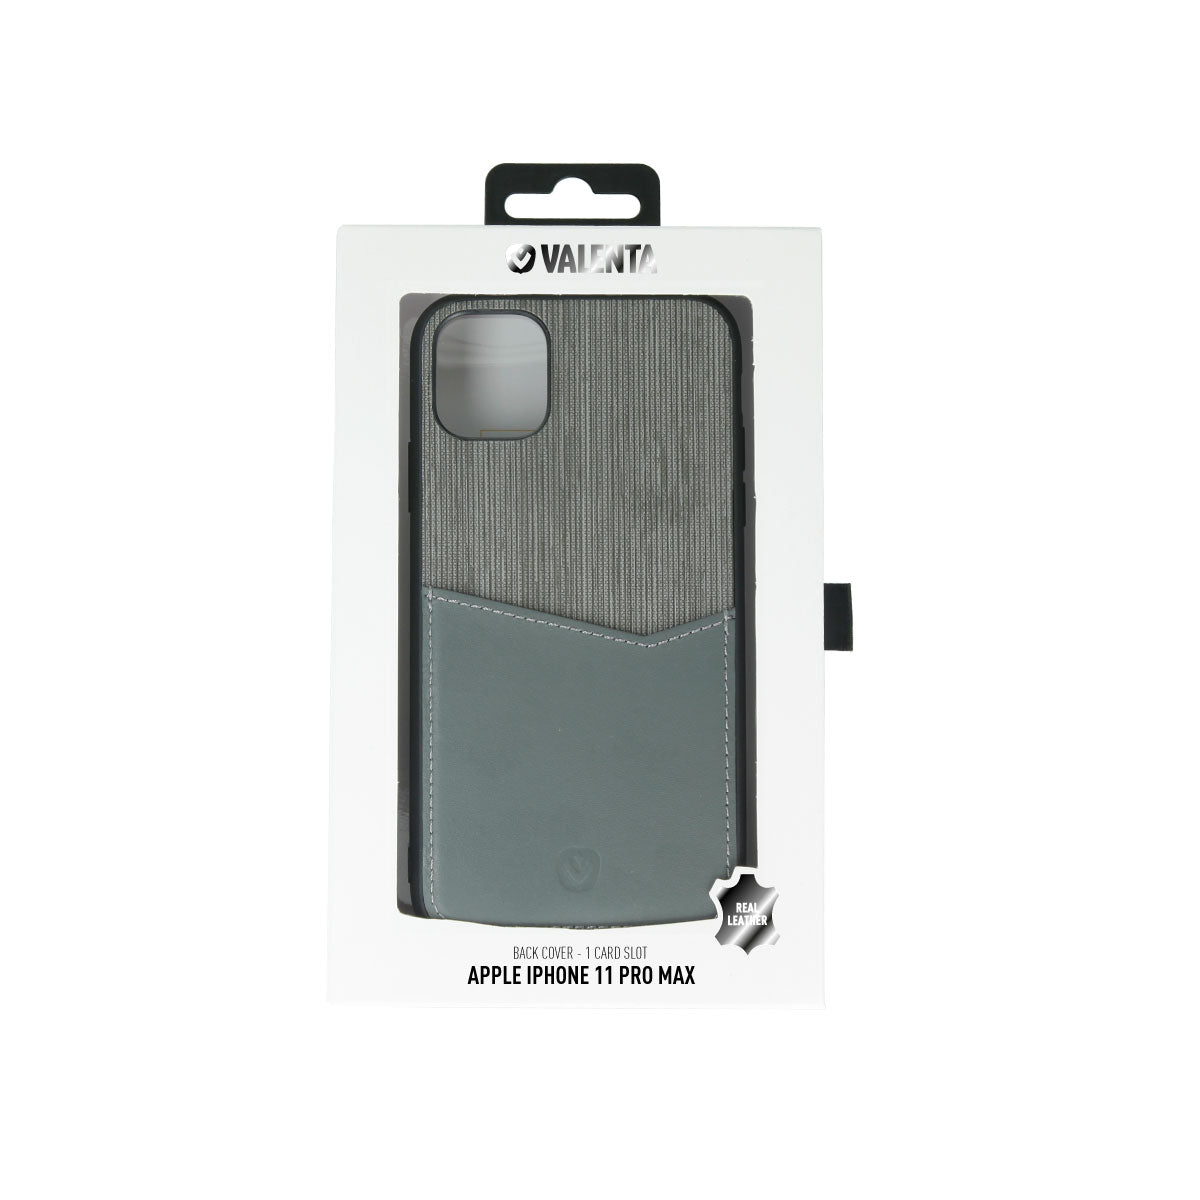 Back Cover Grey Card Slot iPhone 11 Pro Max